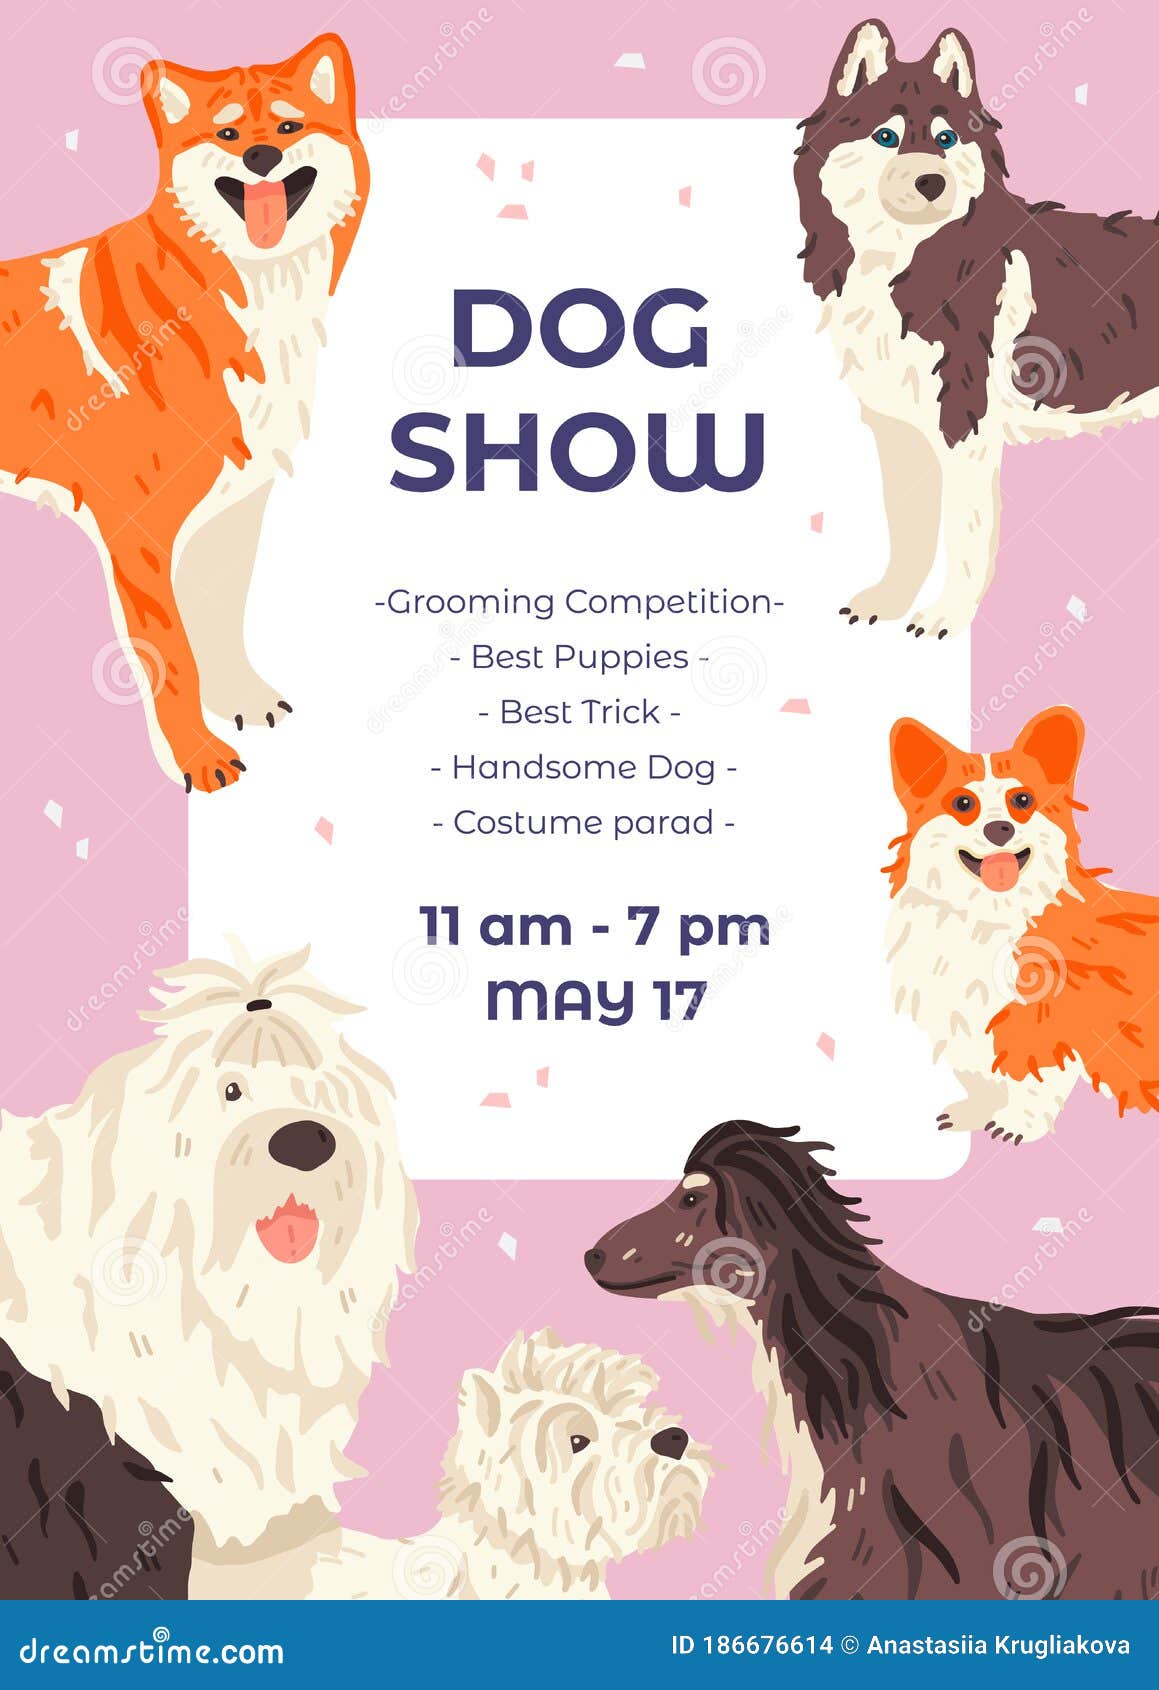 Dog Show Promo Poster Template With Different Dogs Stock Illustration Illustration Of Pets Drawn 186676614